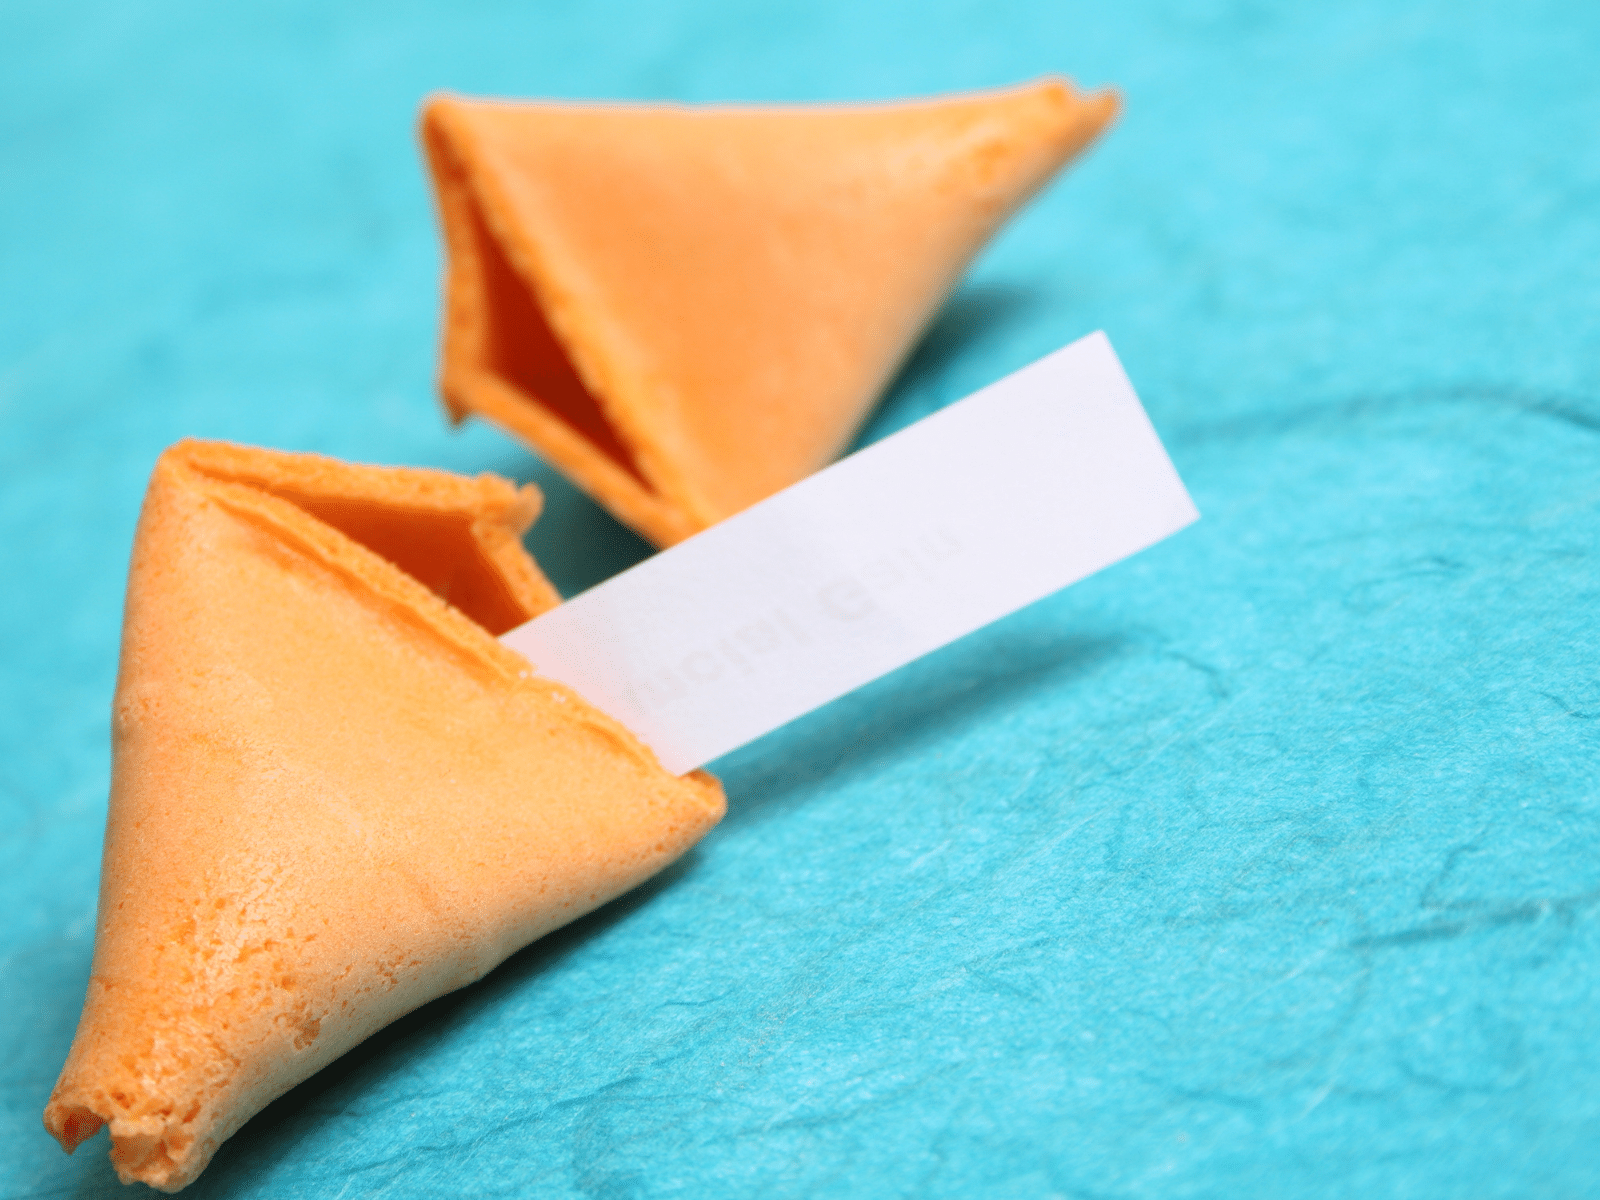 Podcast Episode 268: Fortune Cookies and Financial Planning